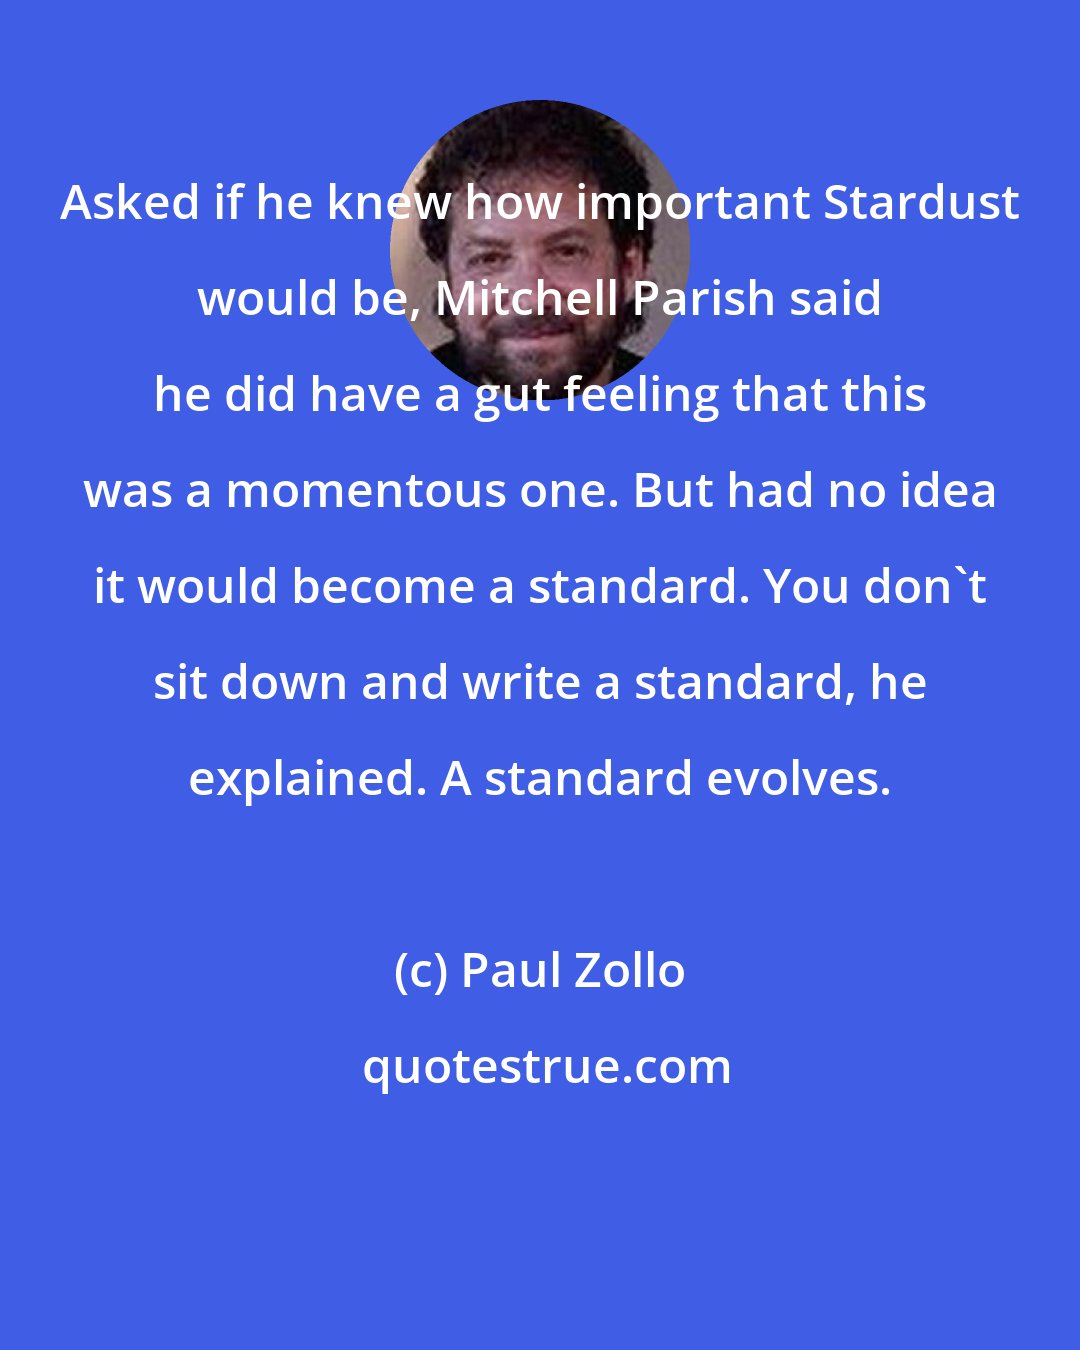 Paul Zollo: Asked if he knew how important Stardust would be, Mitchell Parish said he did have a gut feeling that this was a momentous one. But had no idea it would become a standard. You don't sit down and write a standard, he explained. A standard evolves.